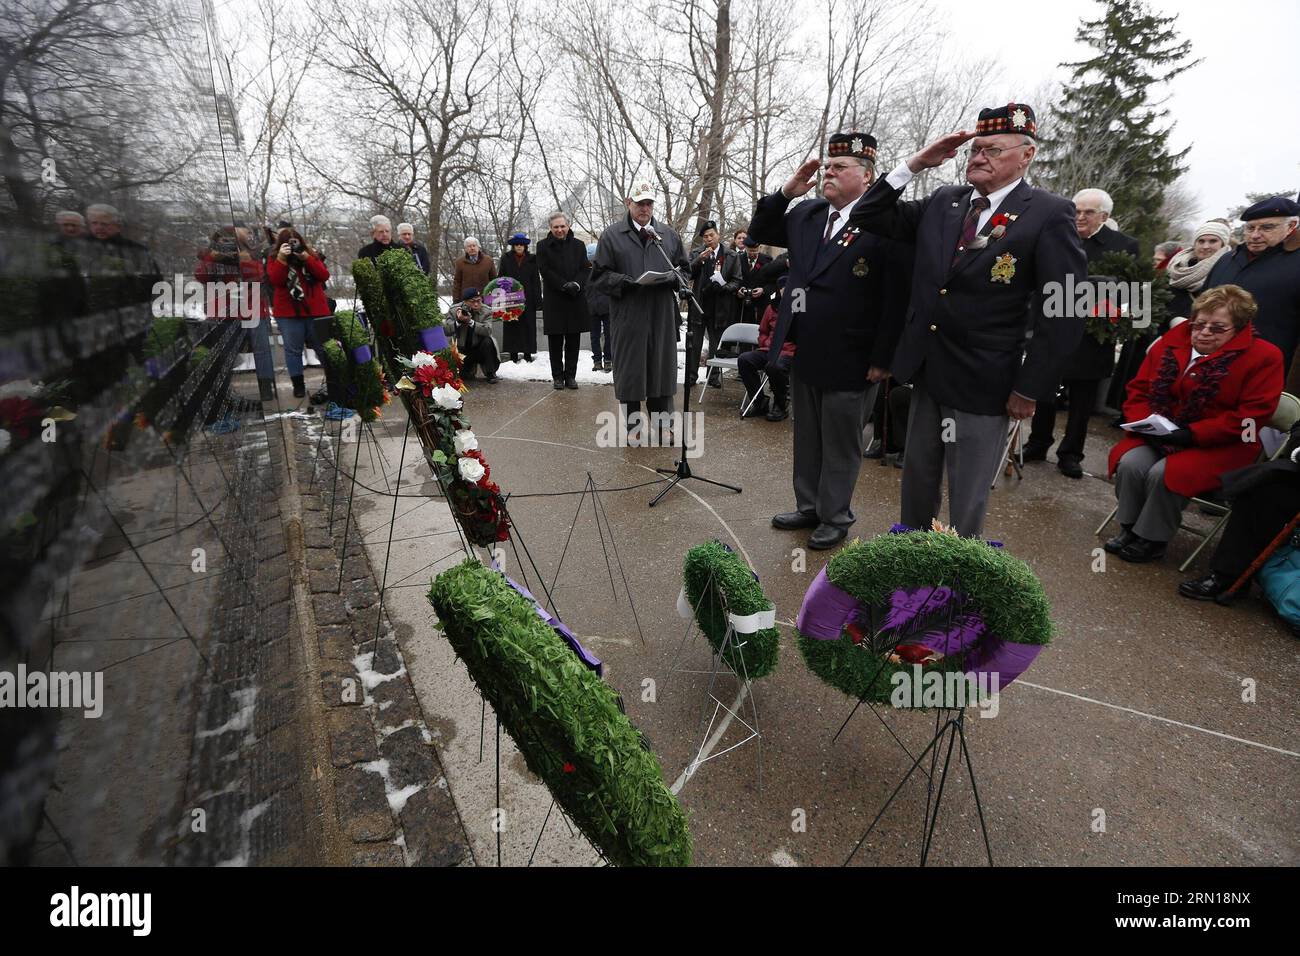 (141206) -- OTTAWA, Dec. 6, 2014 -- People participate in a ceremony to commemorate Canadian soldiers who fought in defense of Hong Kong, China, against the Japanese during WWII at Canadian Force Memorial Wall in Ottawa, Canada, on Dec. 6, 2014. In 1941, about 1,975 Canadian soldiers fought in Hong Kong for 18 days against Japanese troops who outnumbered them. About 290 of them were killed in the battle. ) CANADA-OTTAWA-HONG KONG BATTLE-COMMEMORATION DavidxKawai PUBLICATIONxNOTxINxCHN   Ottawa DEC 6 2014 Celebrities participate in a Ceremony to commemorate Canadian Soldiers Who fought in Defen Stock Photo